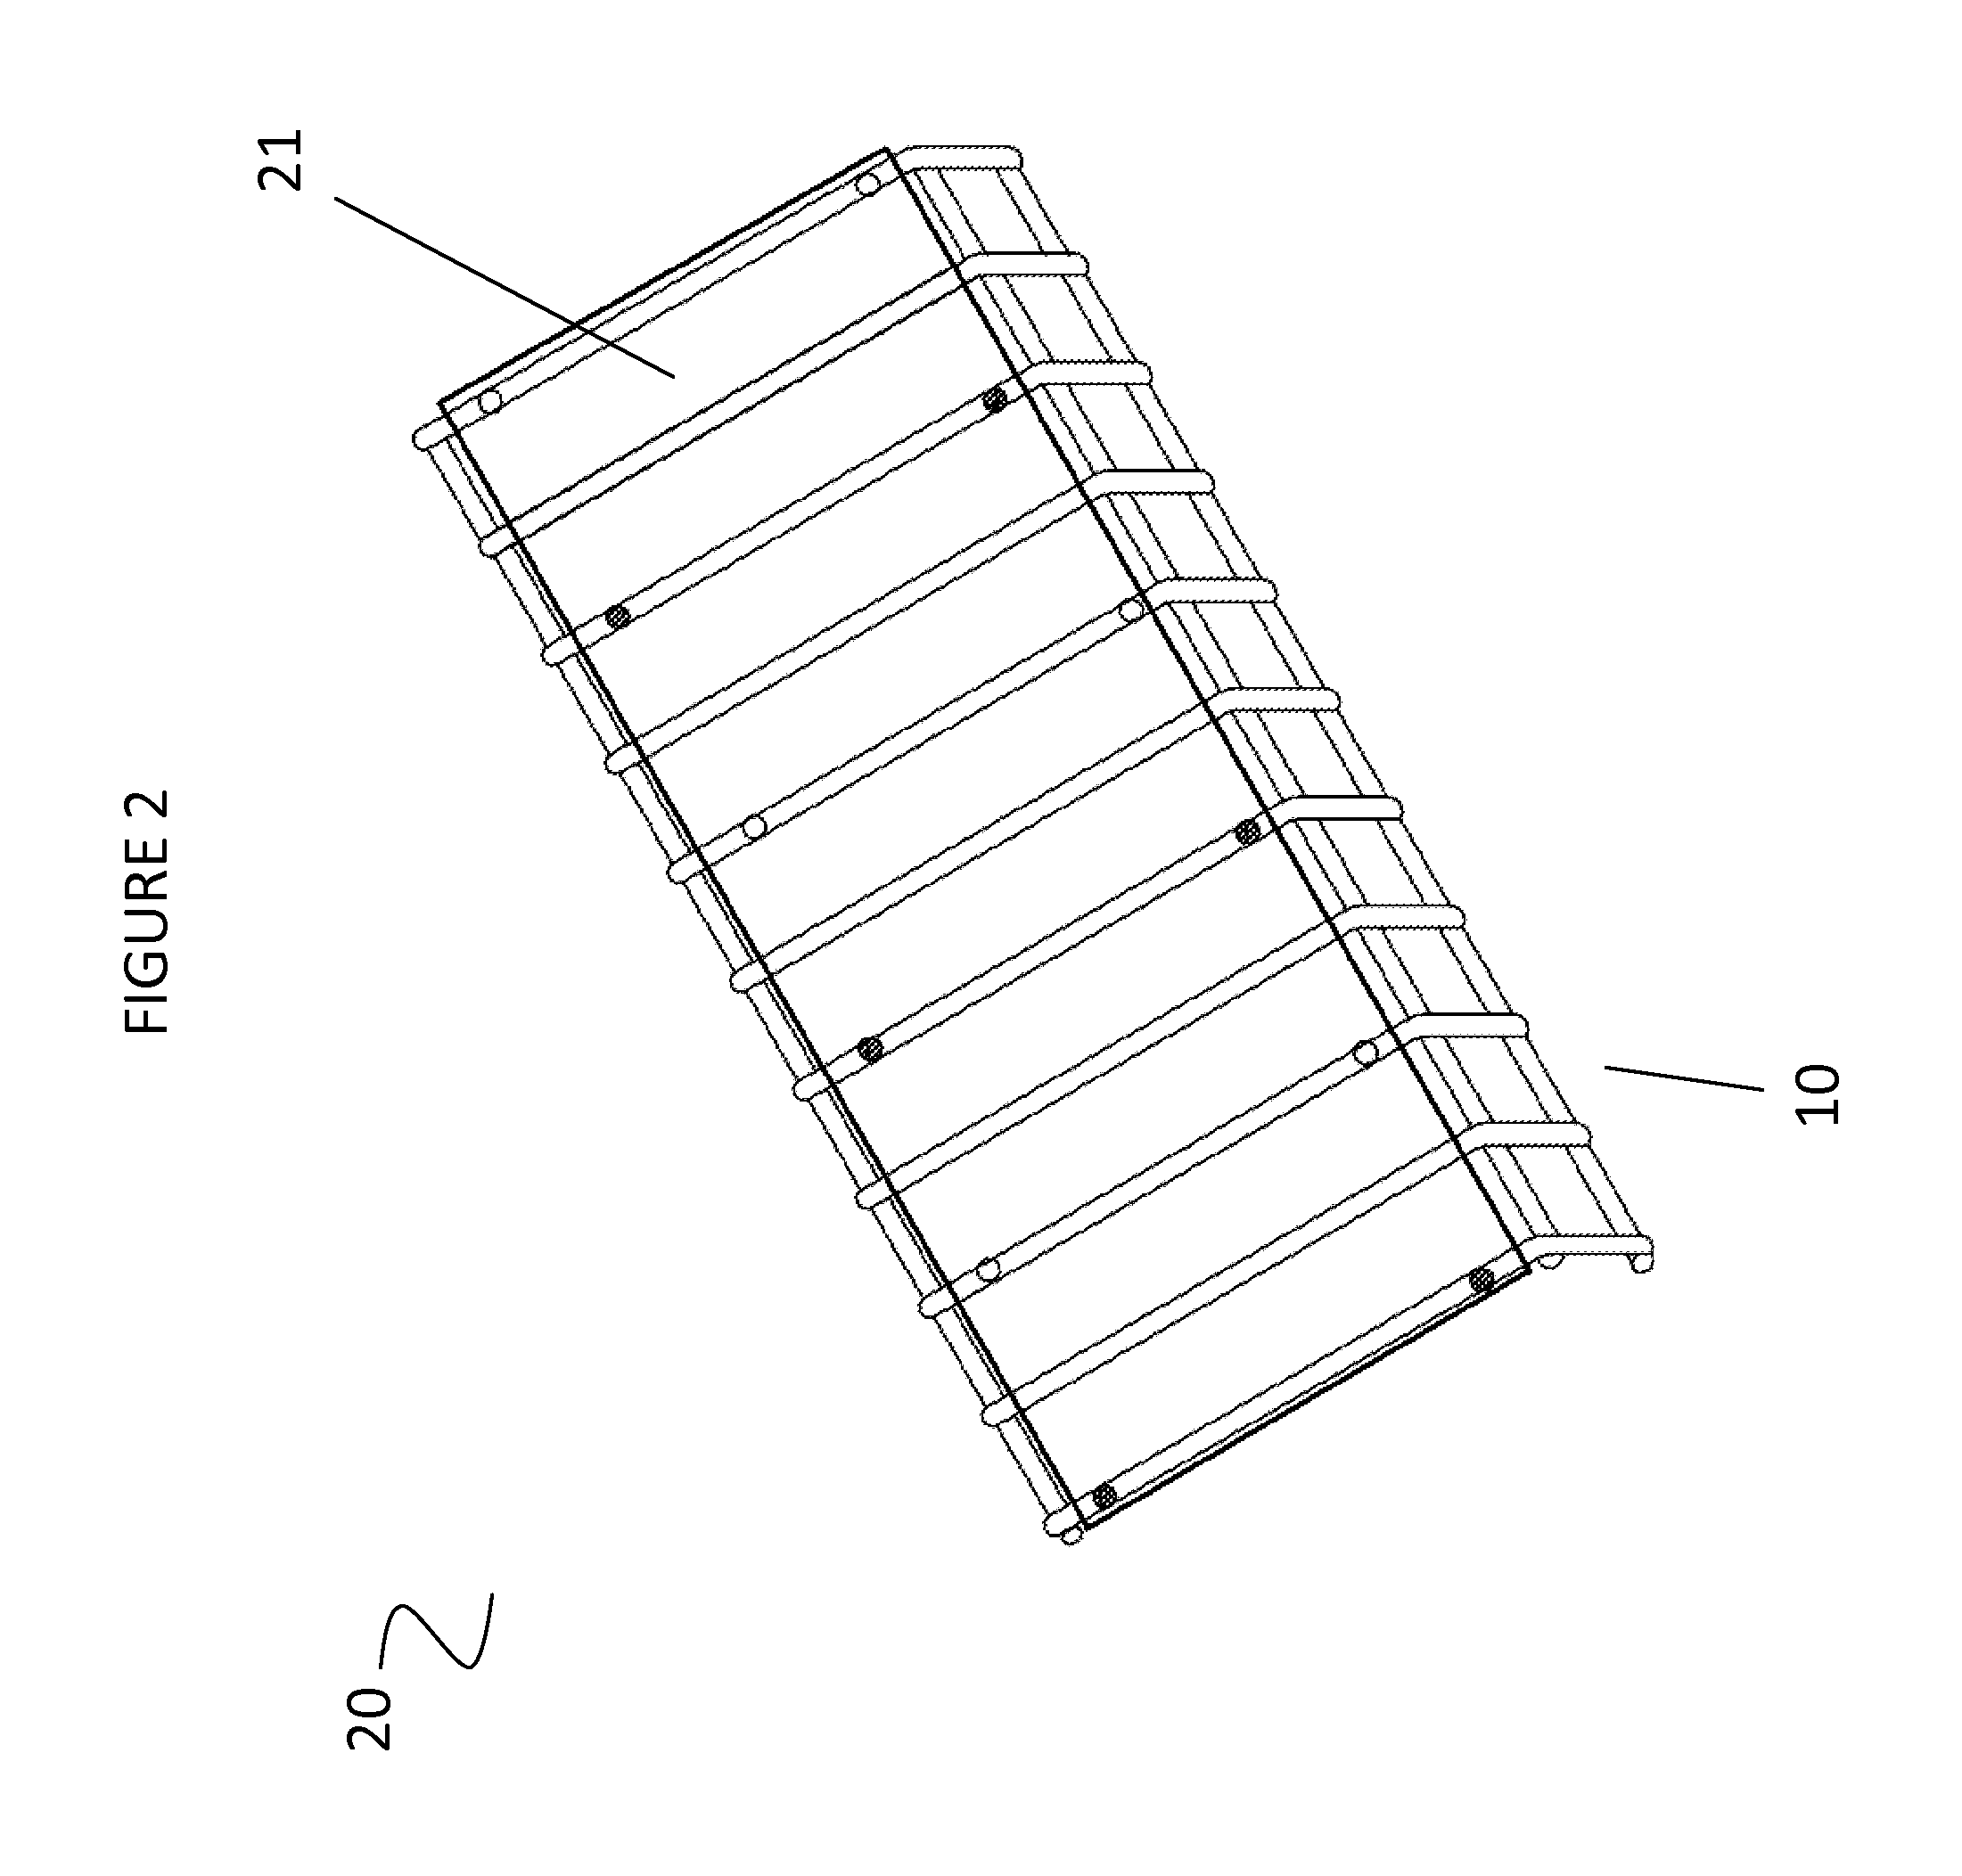 Shelving and protective covering system